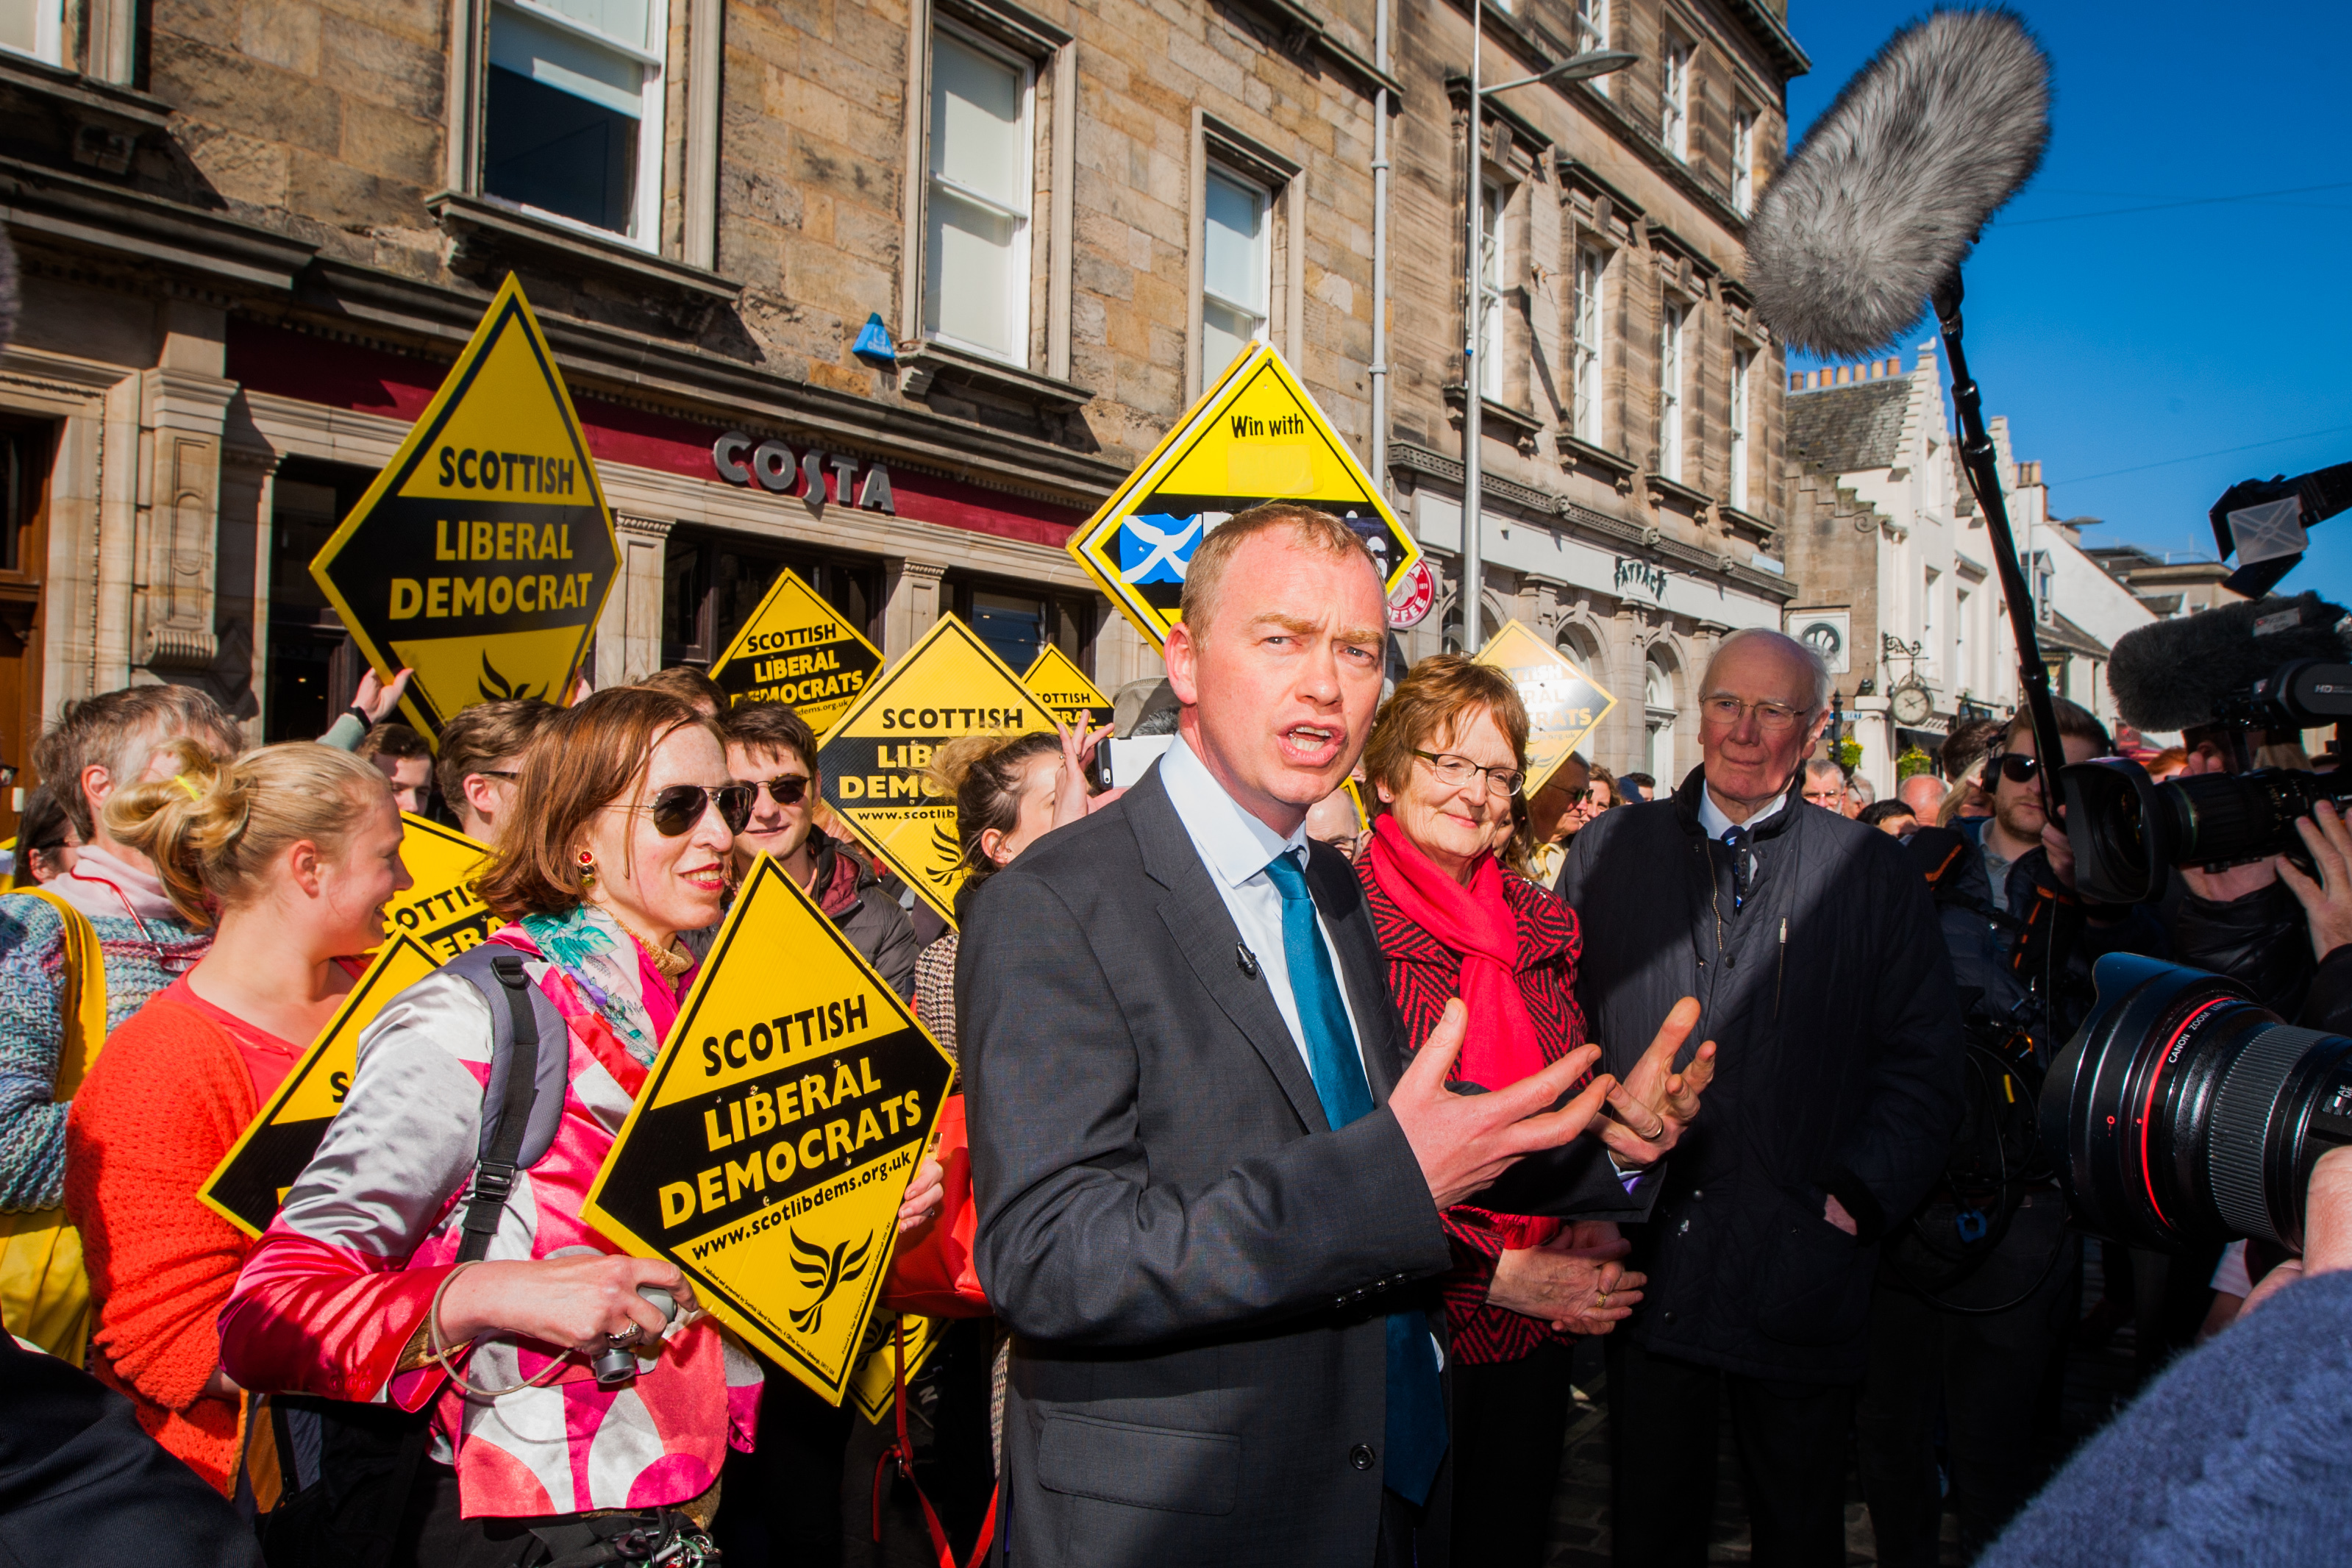 Tim Farron (front) alongside Elizabeth Richies and Sir Menzies Campbell in Market Street, St Andrews.